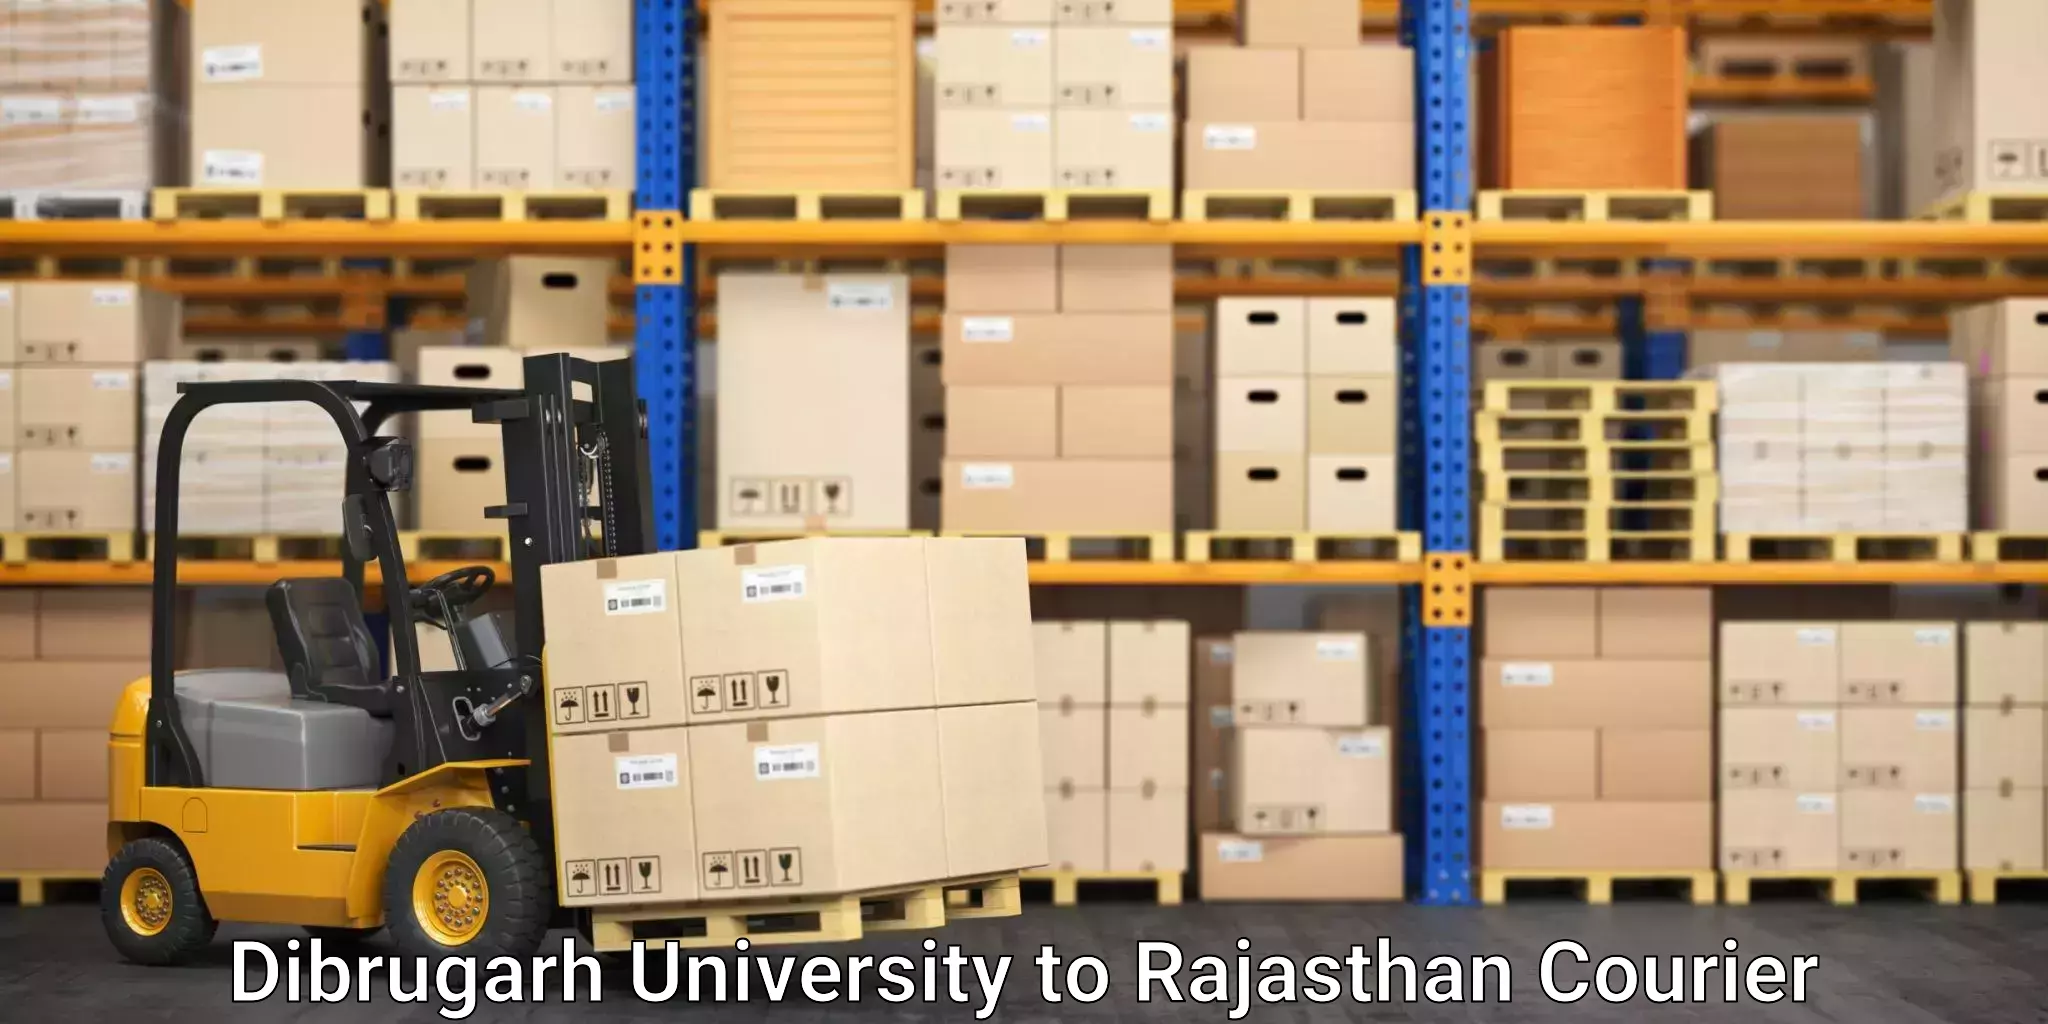 Specialized courier services in Dibrugarh University to Rajasthan